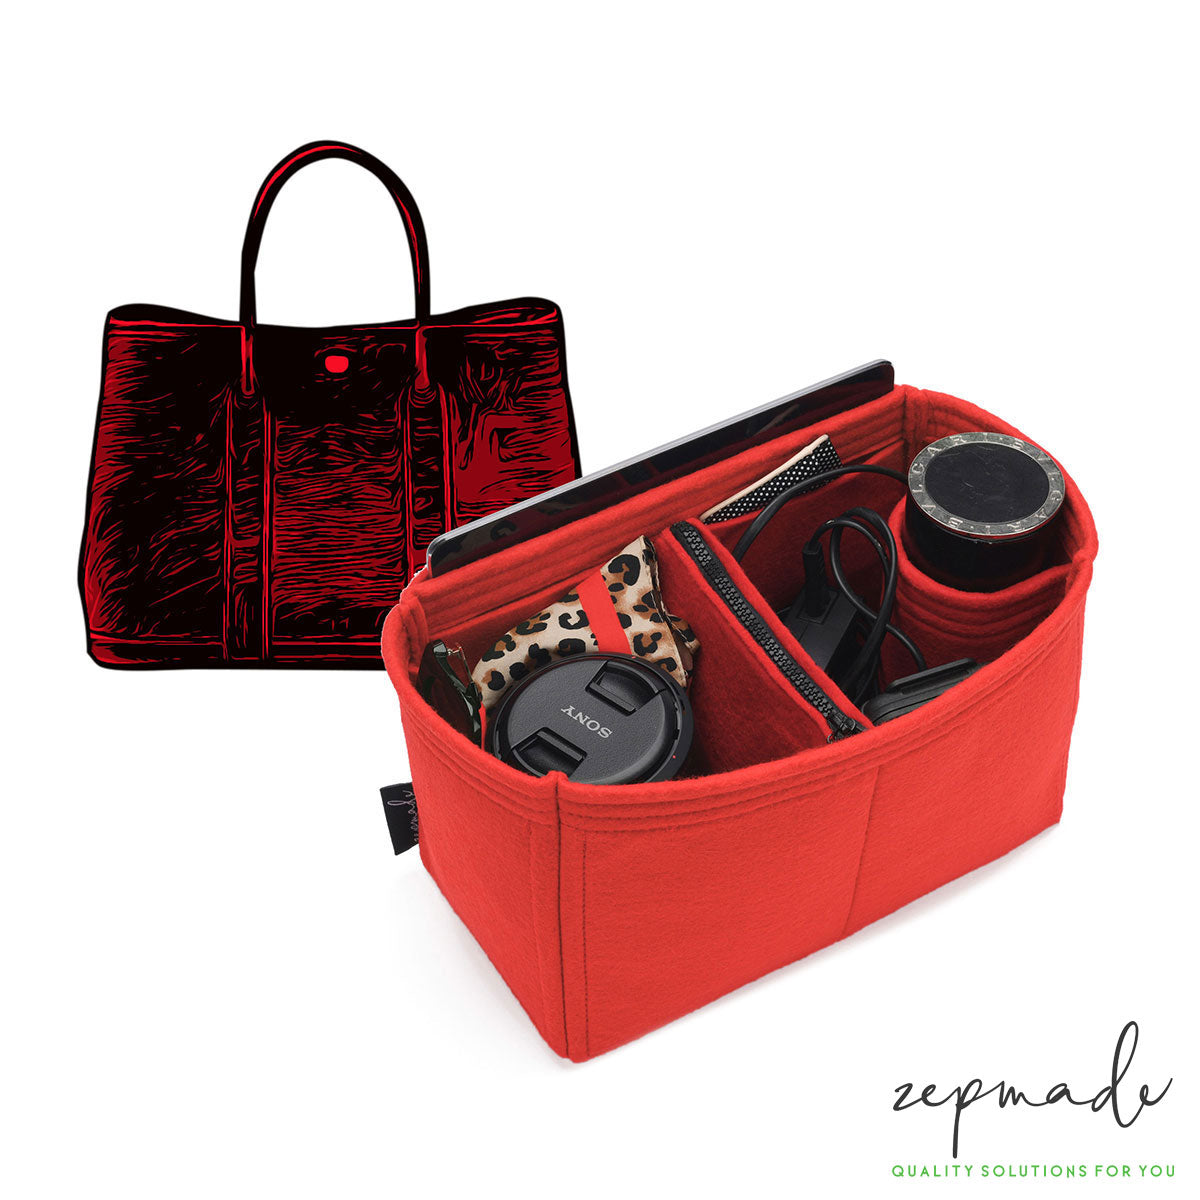 Bag and Purse Organizer with Zipper Top Style for Hermes Garden Party Models